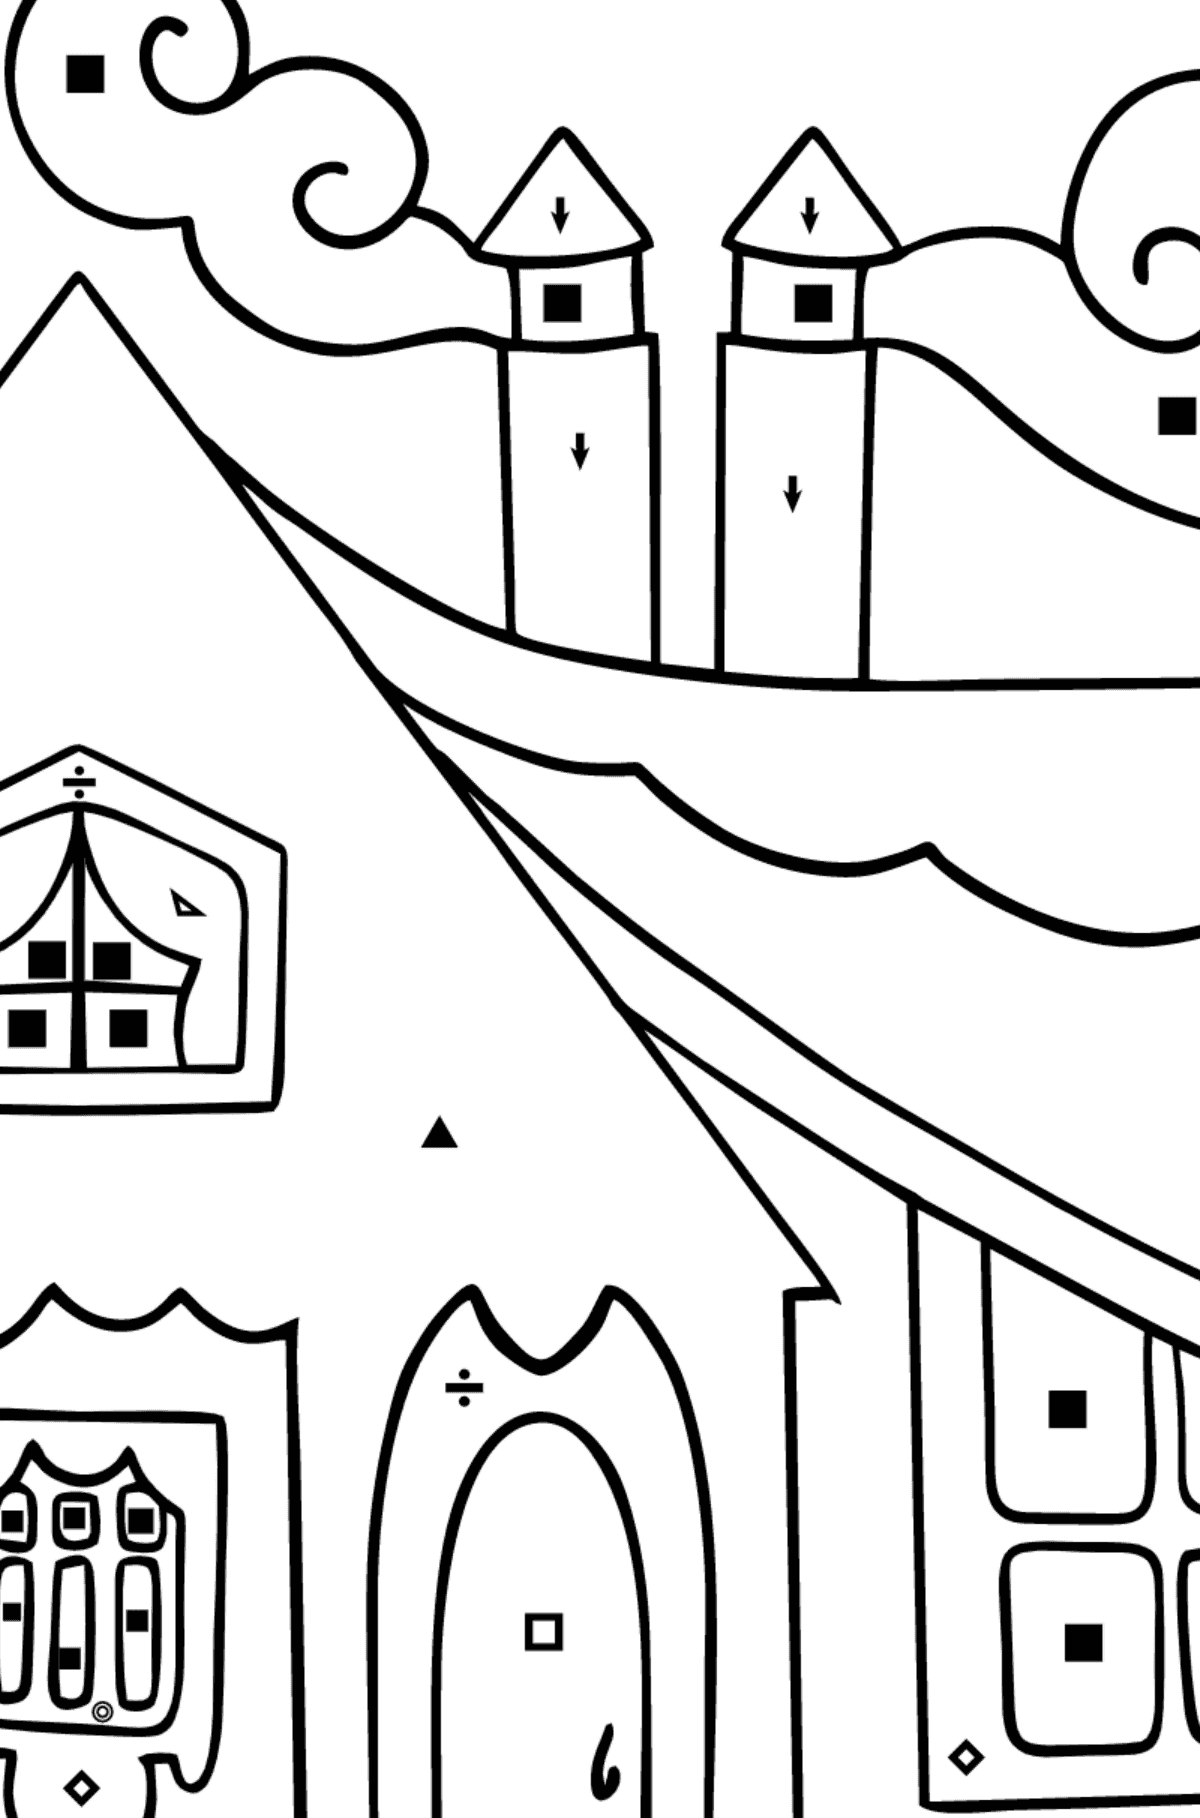 Simple Coloring Page - A Tiny House for Kids  - Color by Symbols and Geometric Shapes